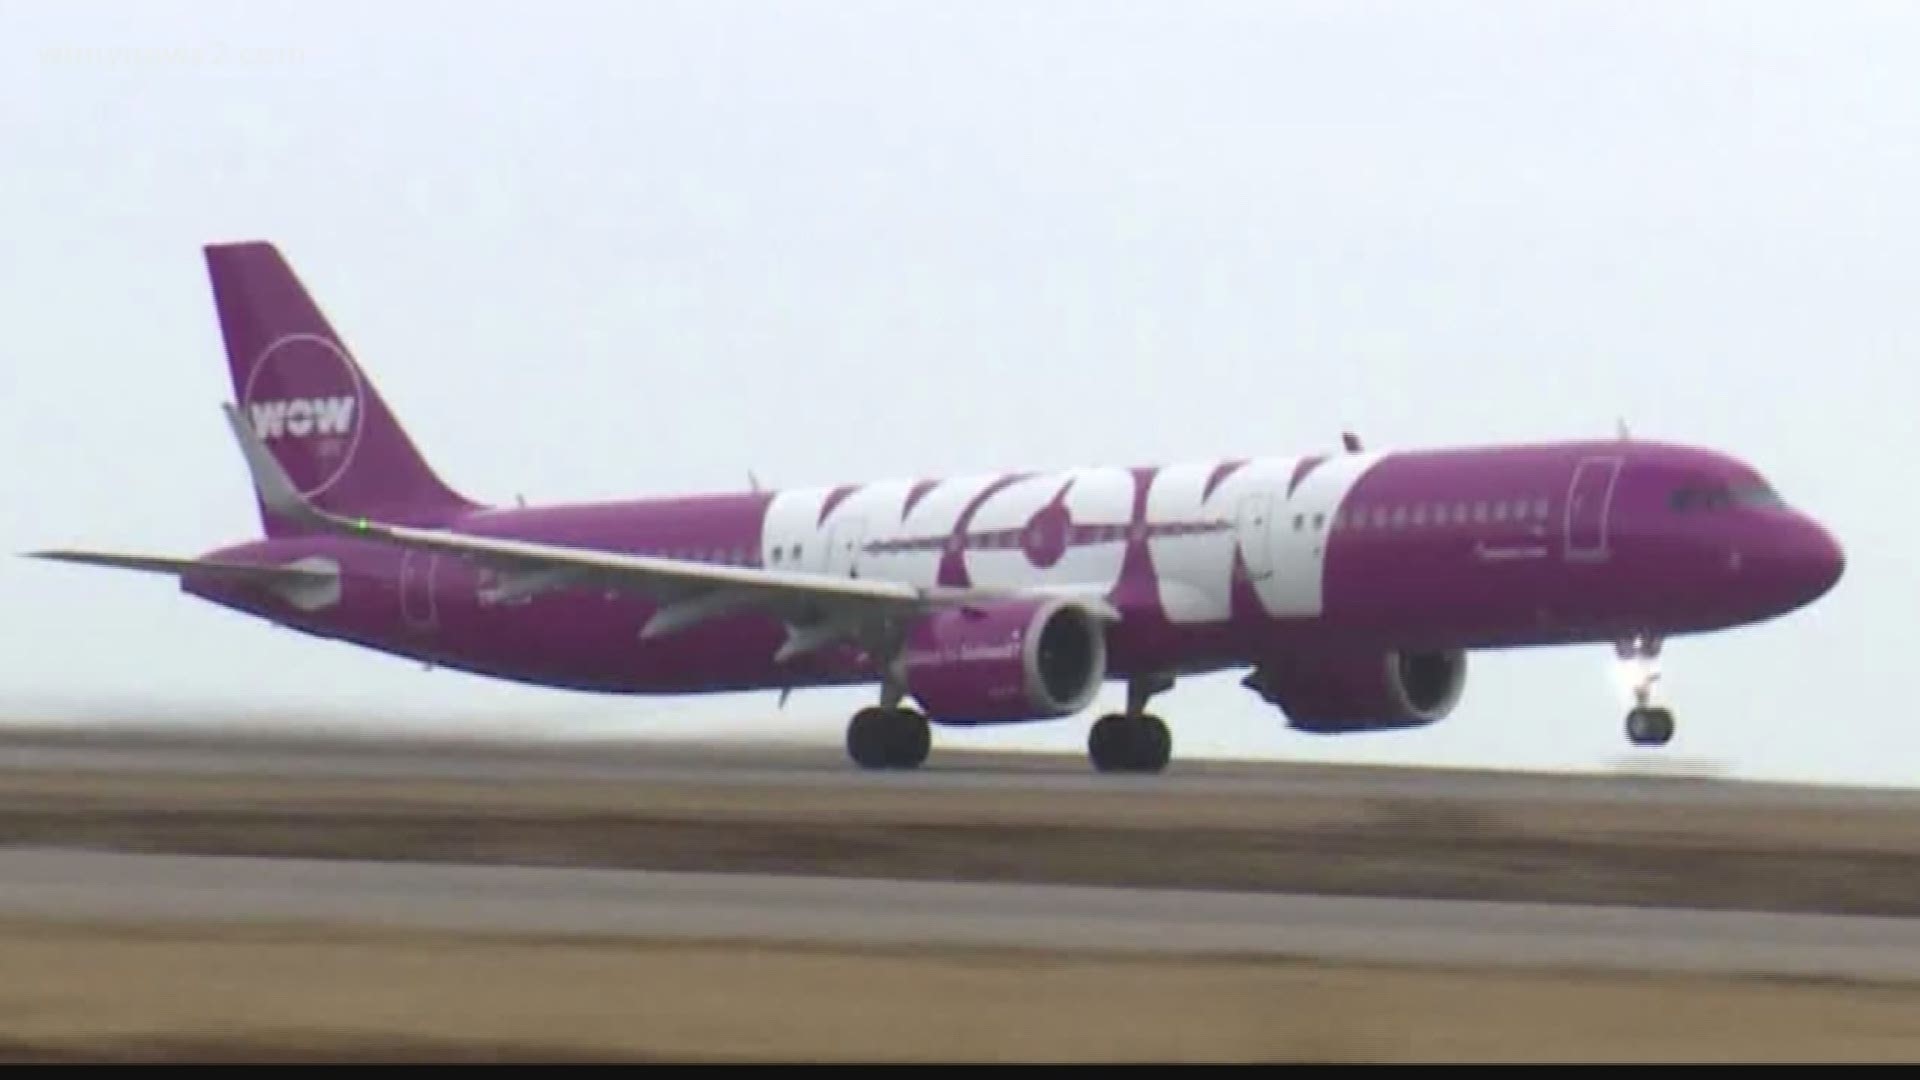 WOW airlines shutdown all operations leaving passengers stranded.  WFMY News 2's Erica Stapleton looks at ways to protect your wallet and your trip.